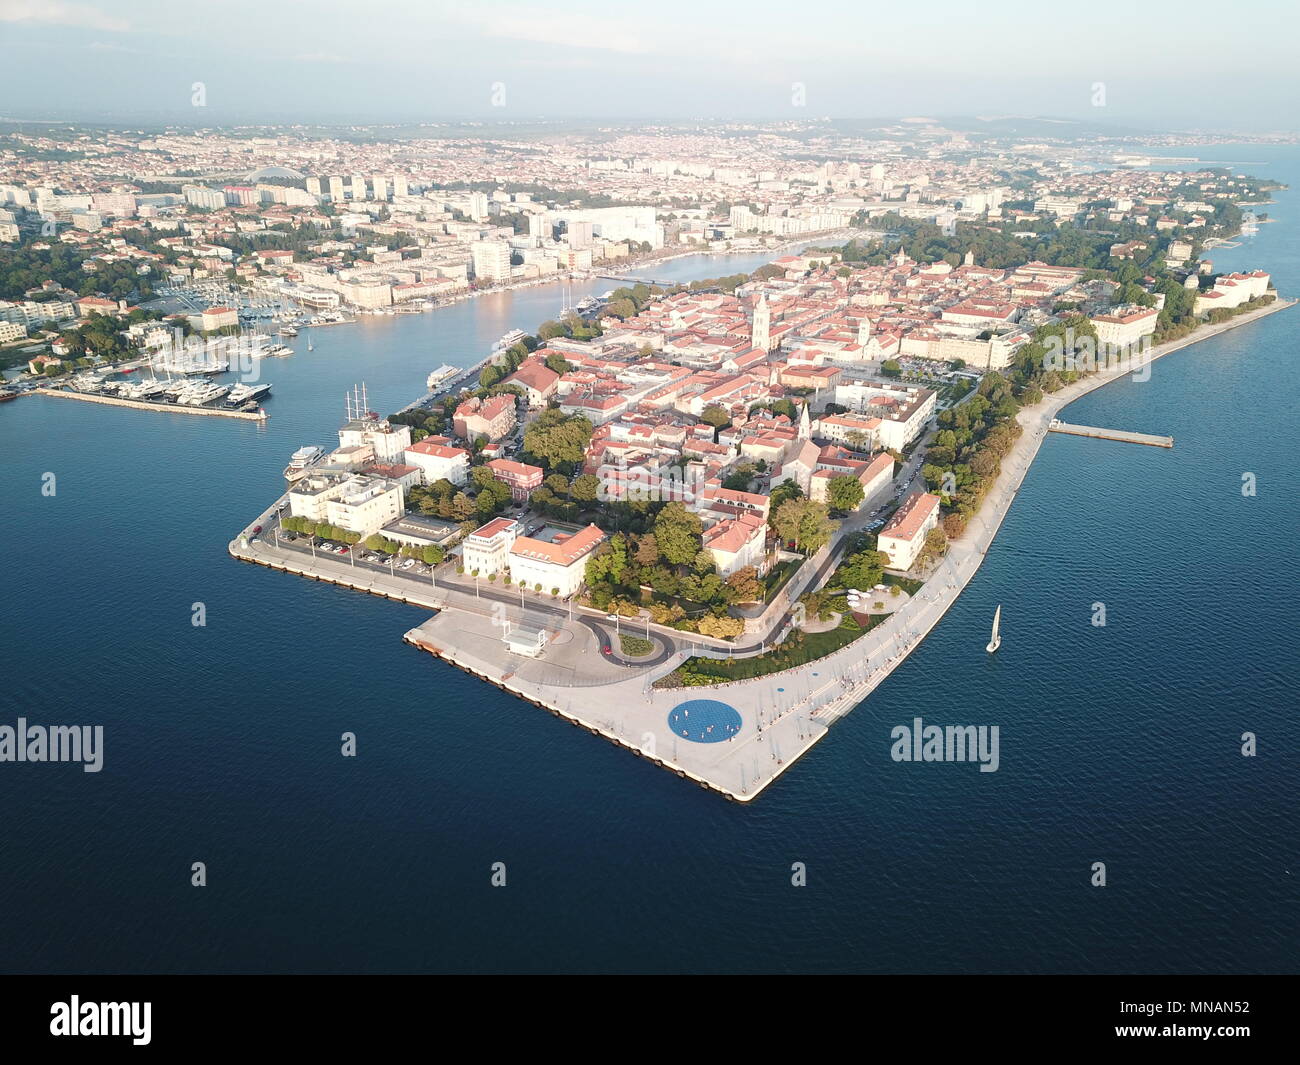 Zagreb. 13th May, 2018. Aerial photo taken on May 13, 2018 shows scenery of coastal city Zadar in Croatia. Zadar city is one of the well known Croatian tourist attractions situated on the Adriatic Sea along the west coast of the country. Credit: Gao Lei/Xinhua/Alamy Live News Stock Photo